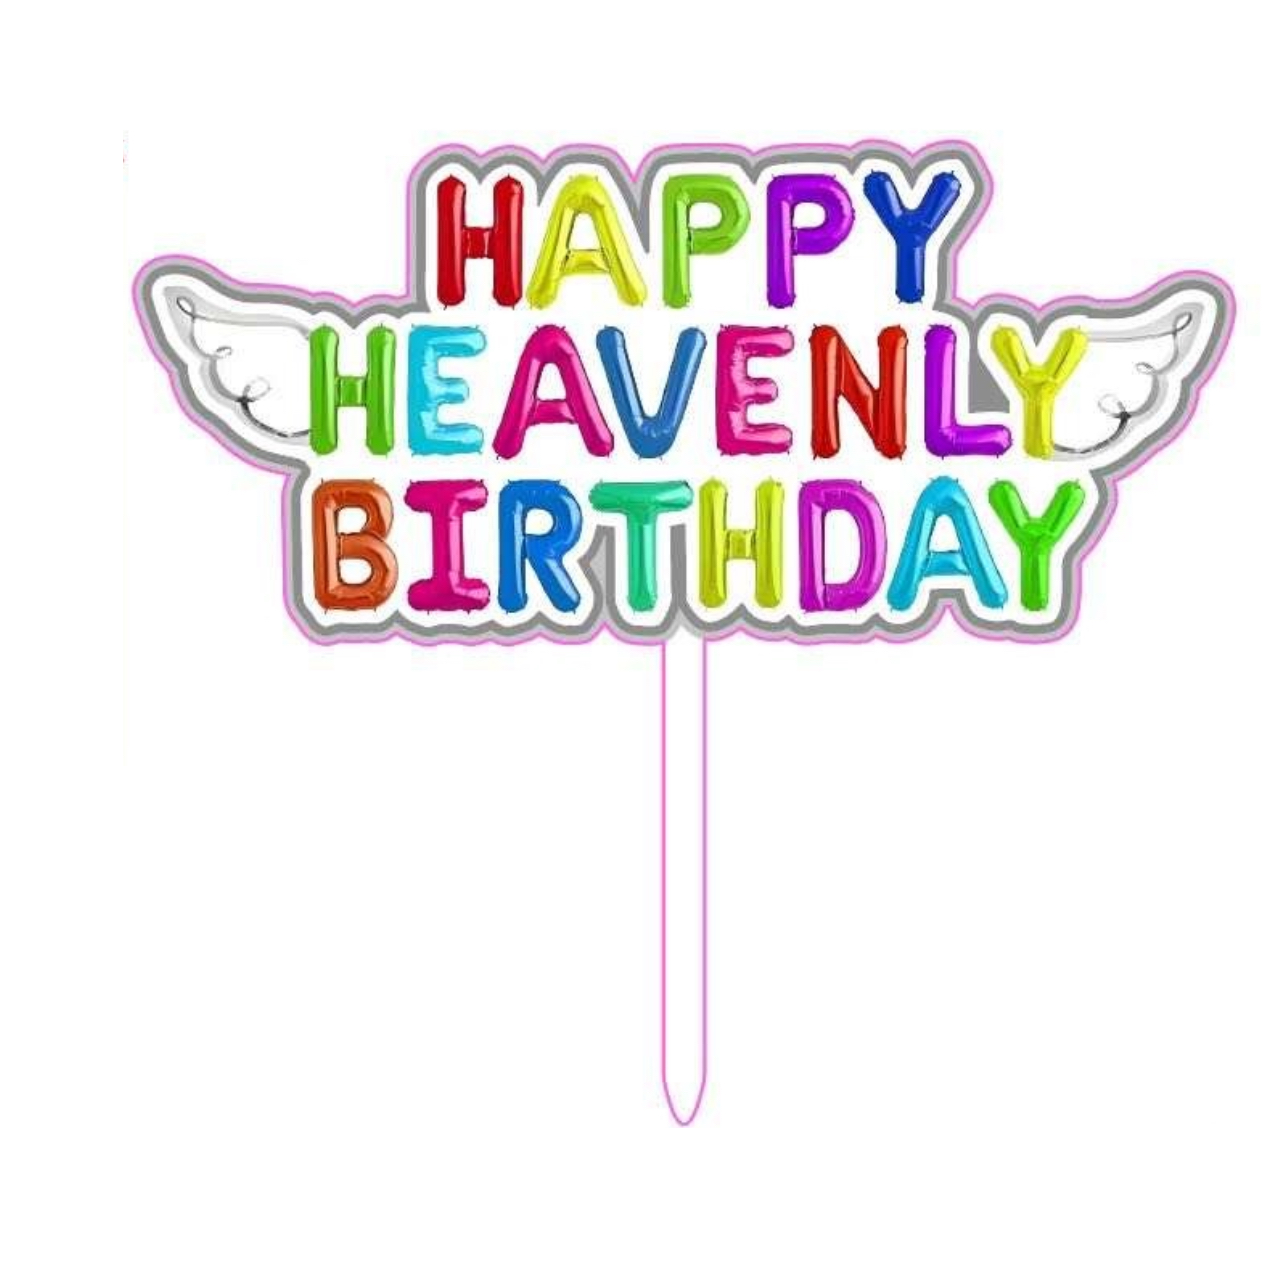 Original Cake Topper Happy Heavenly Birthday Colorful with angel wings 